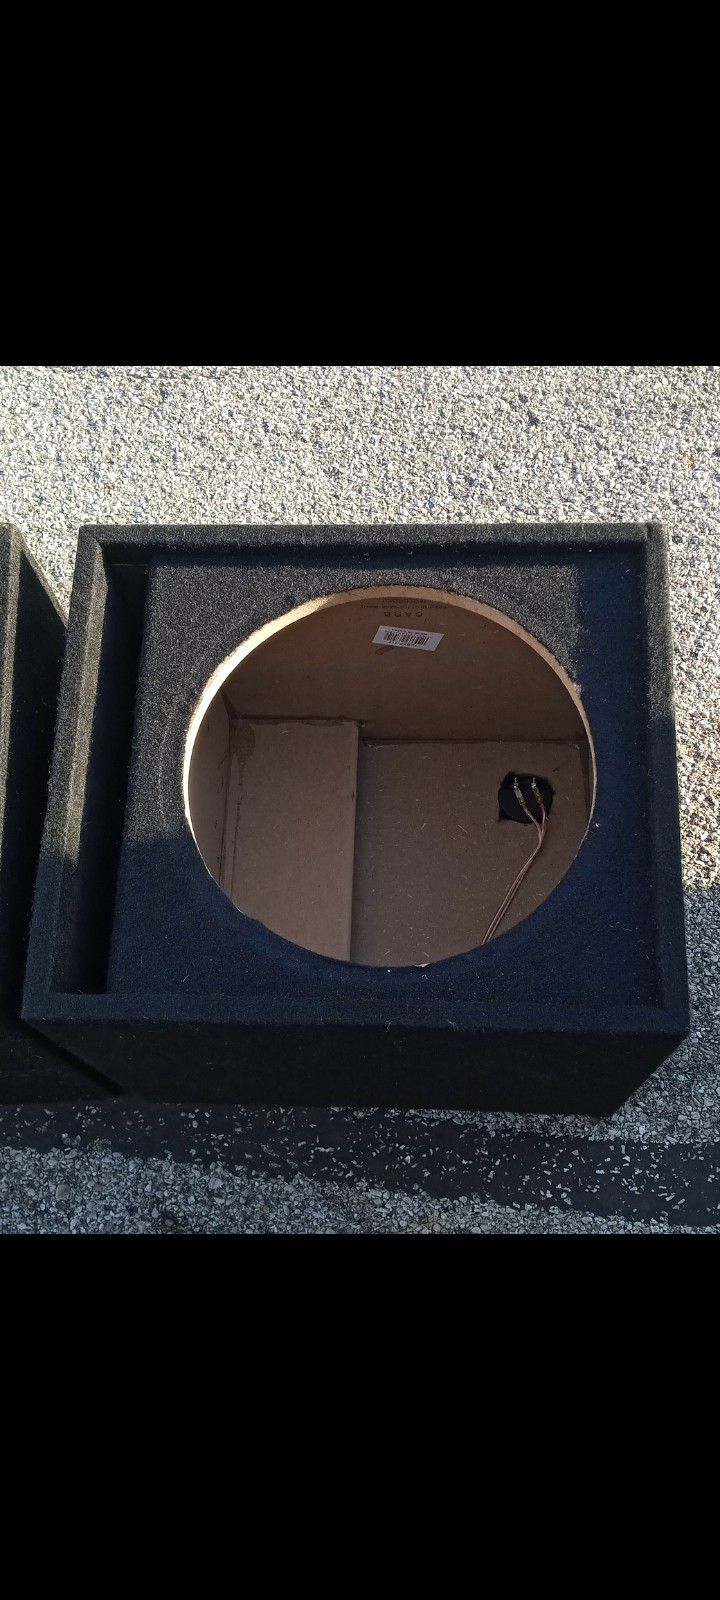 12 Inch Ported Box 